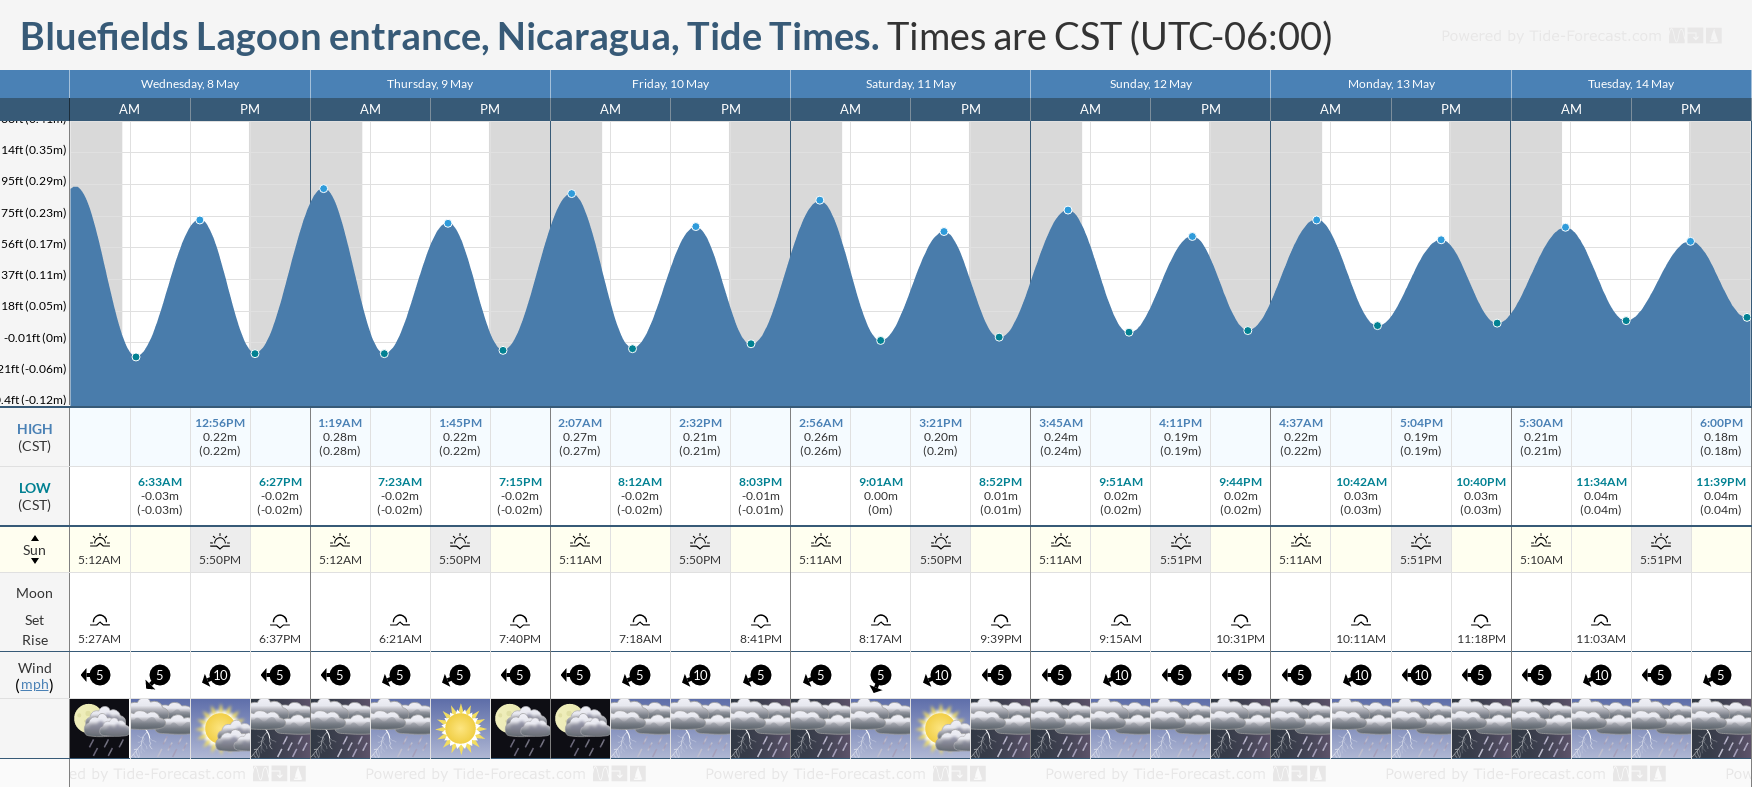 Bluefields Lagoon entrance, Nicaragua Tide Chart including high and low tide times for the next 7 days